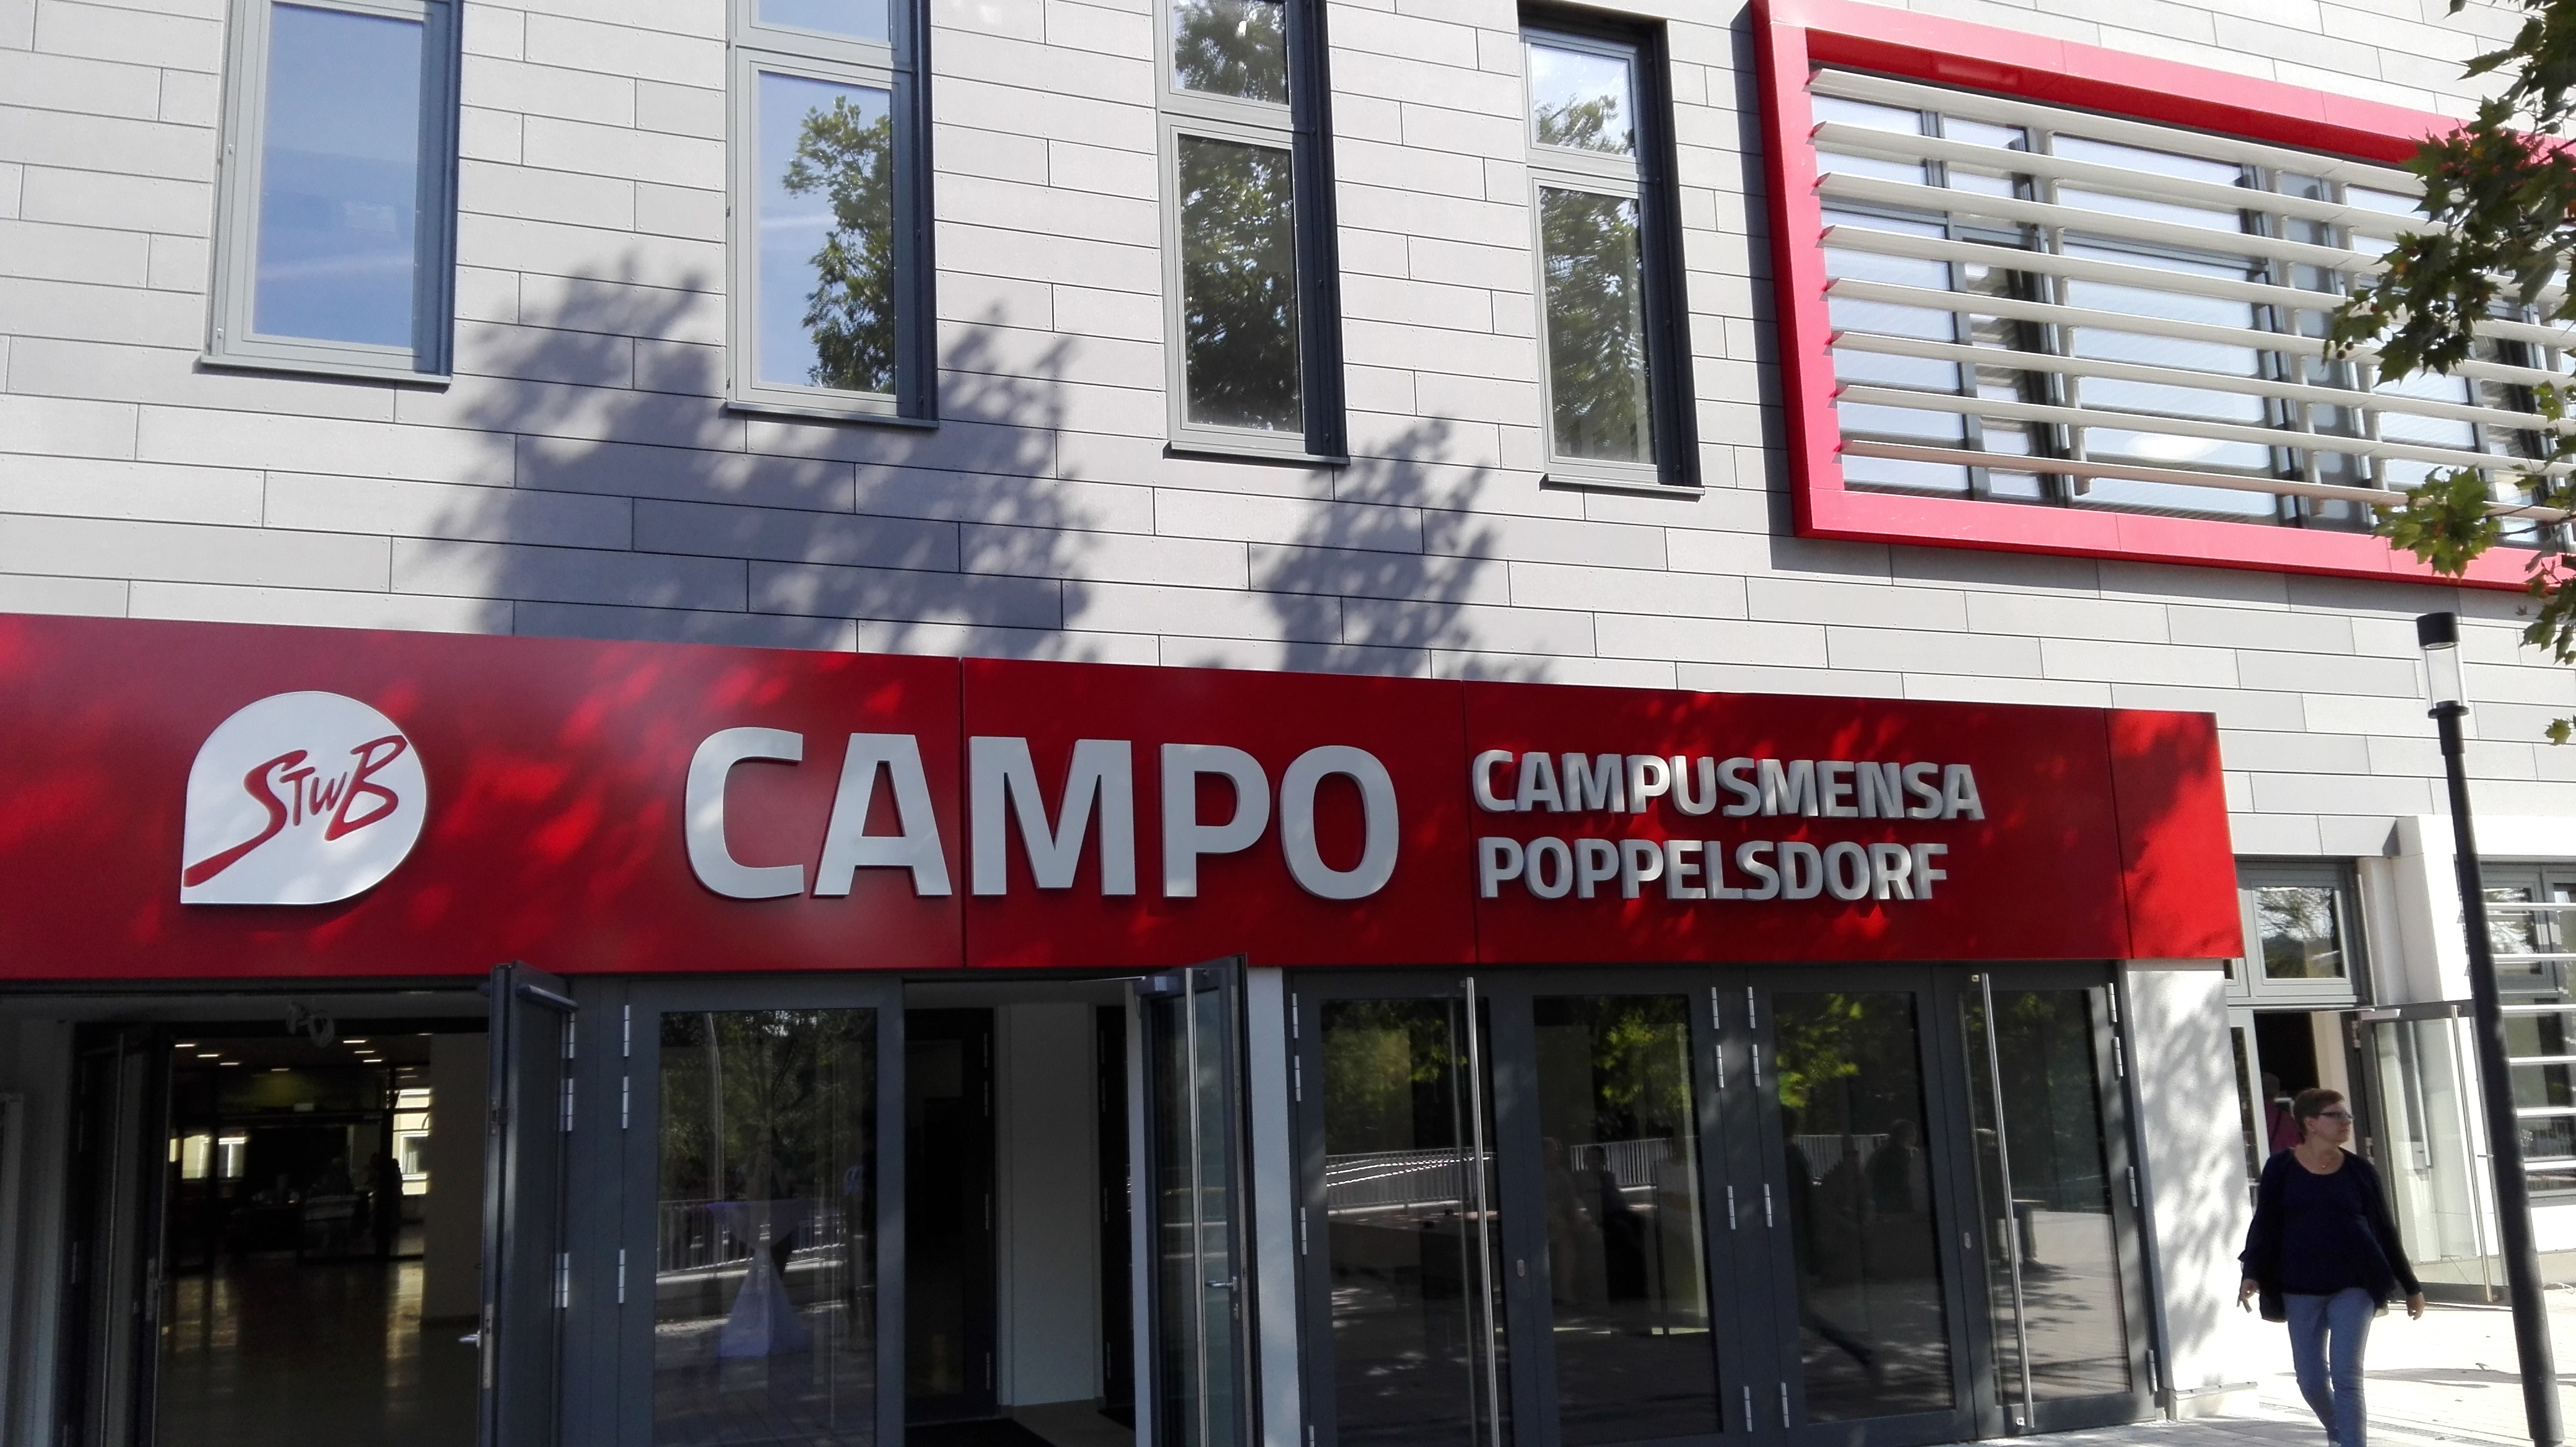 You are currently viewing Die neue CAMPO Campusmensa Poppelsdorf